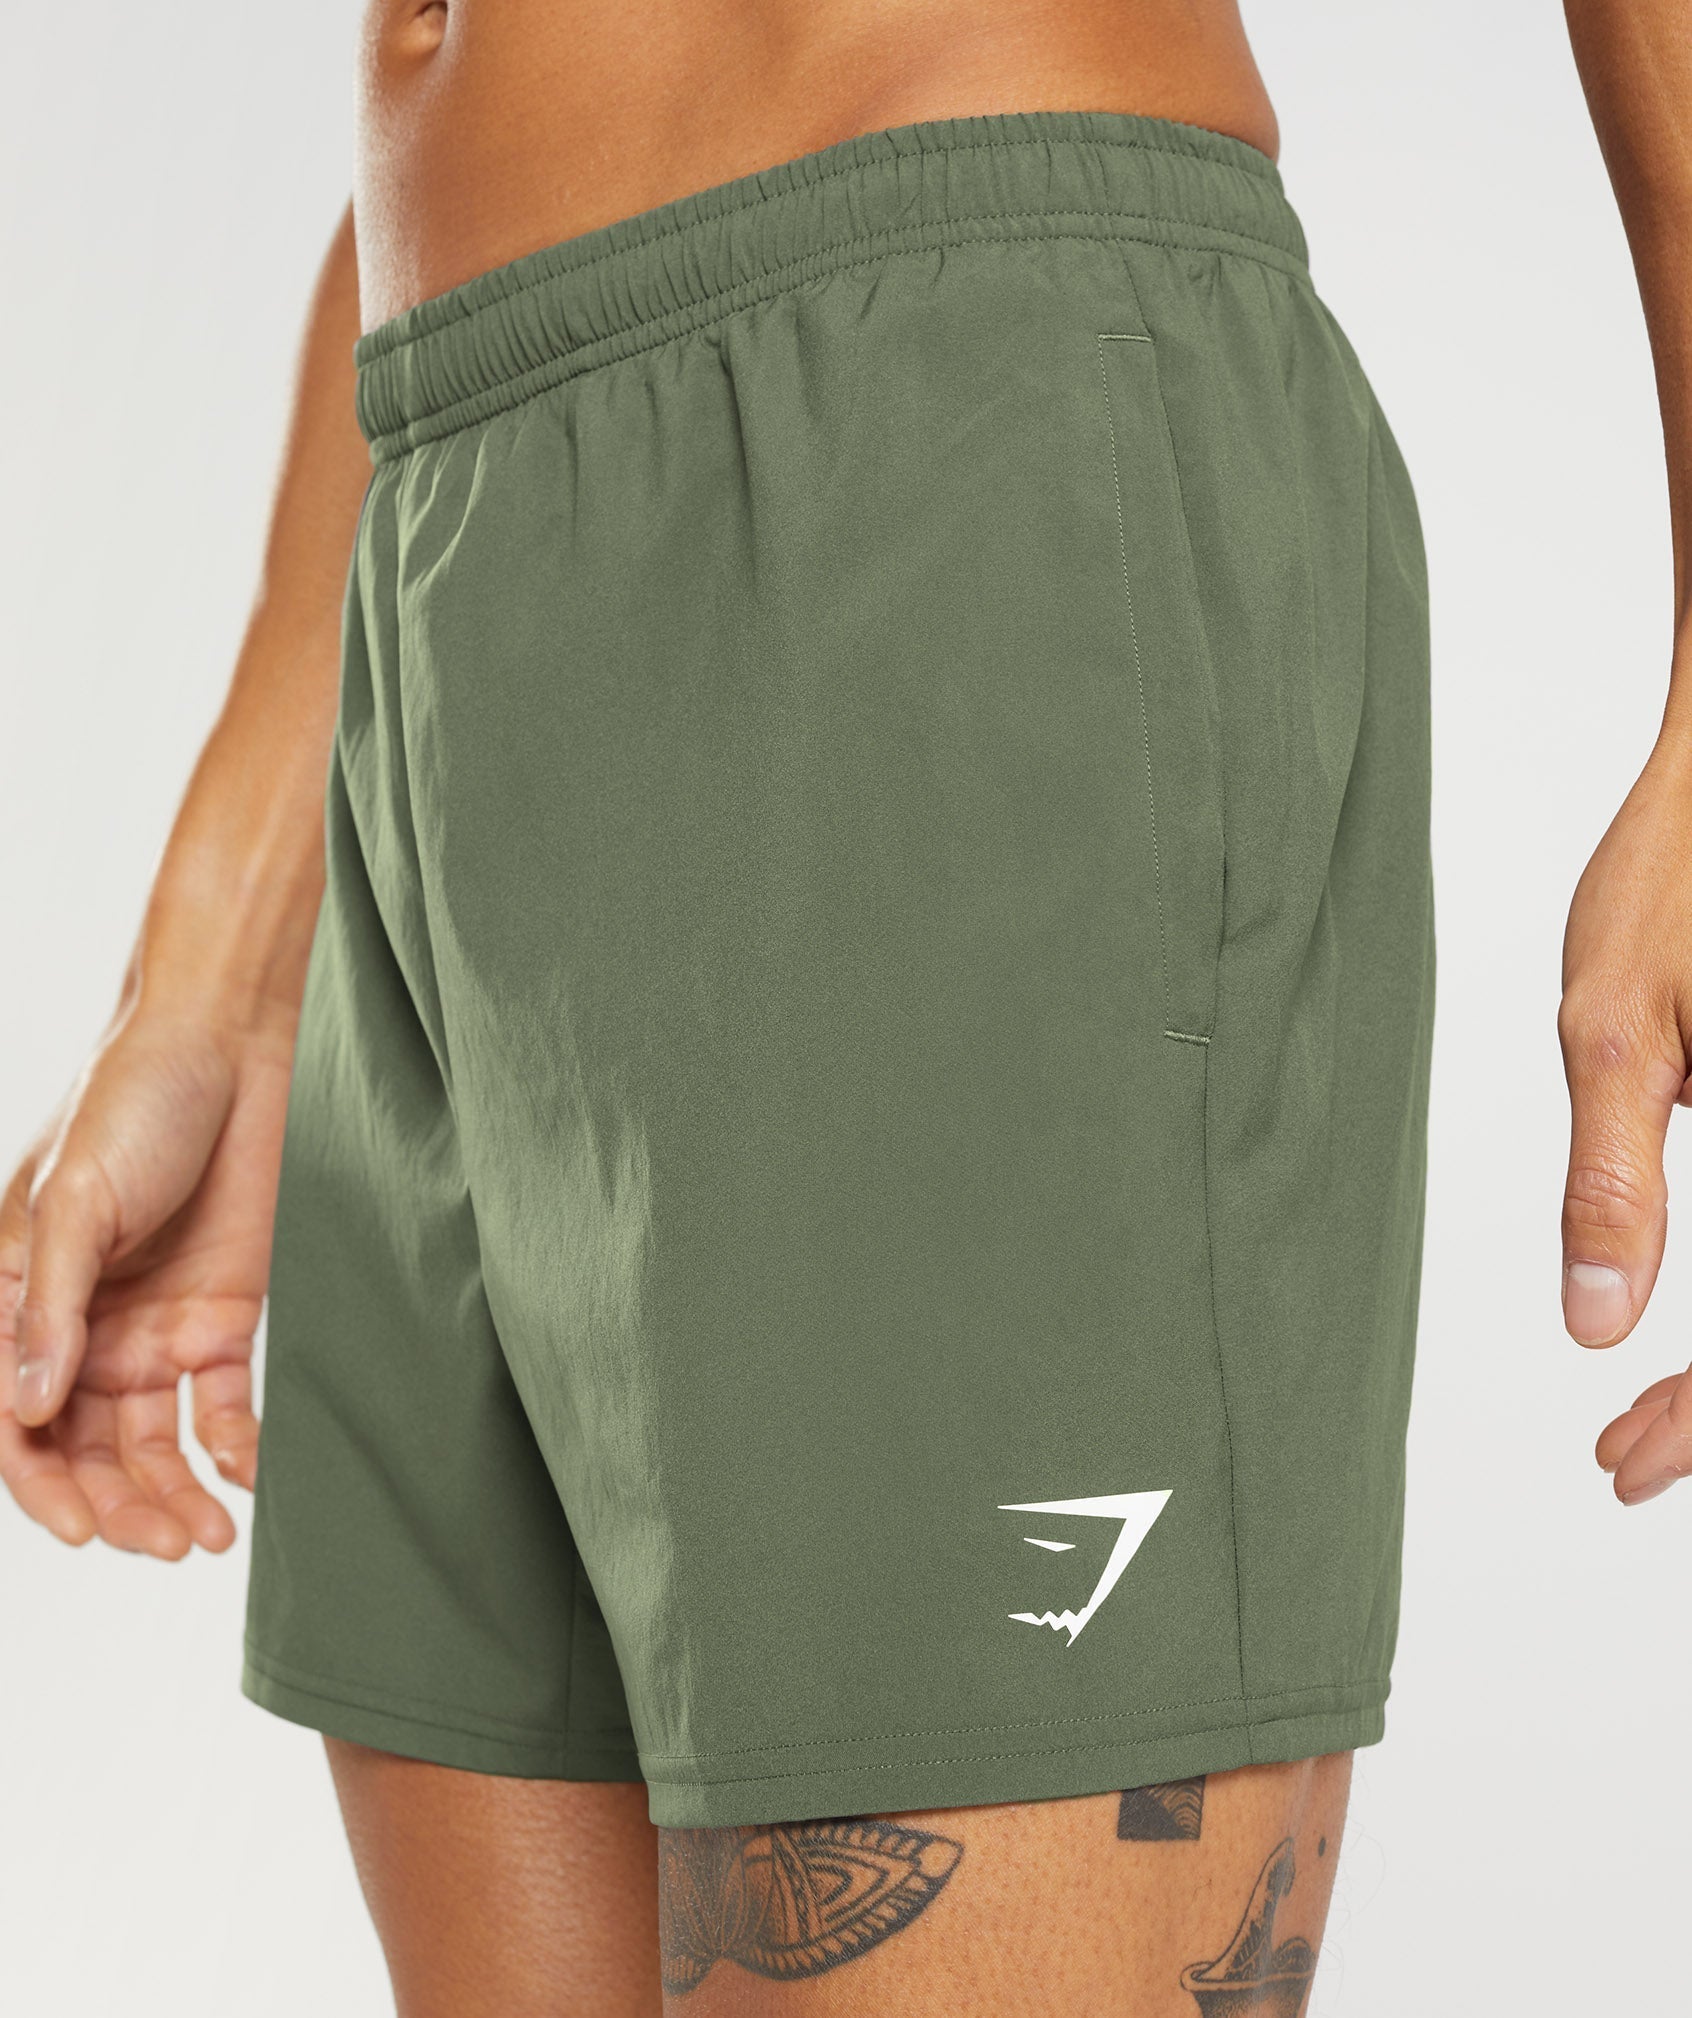 Arrival 5" Shorts in Core Olive - view 3